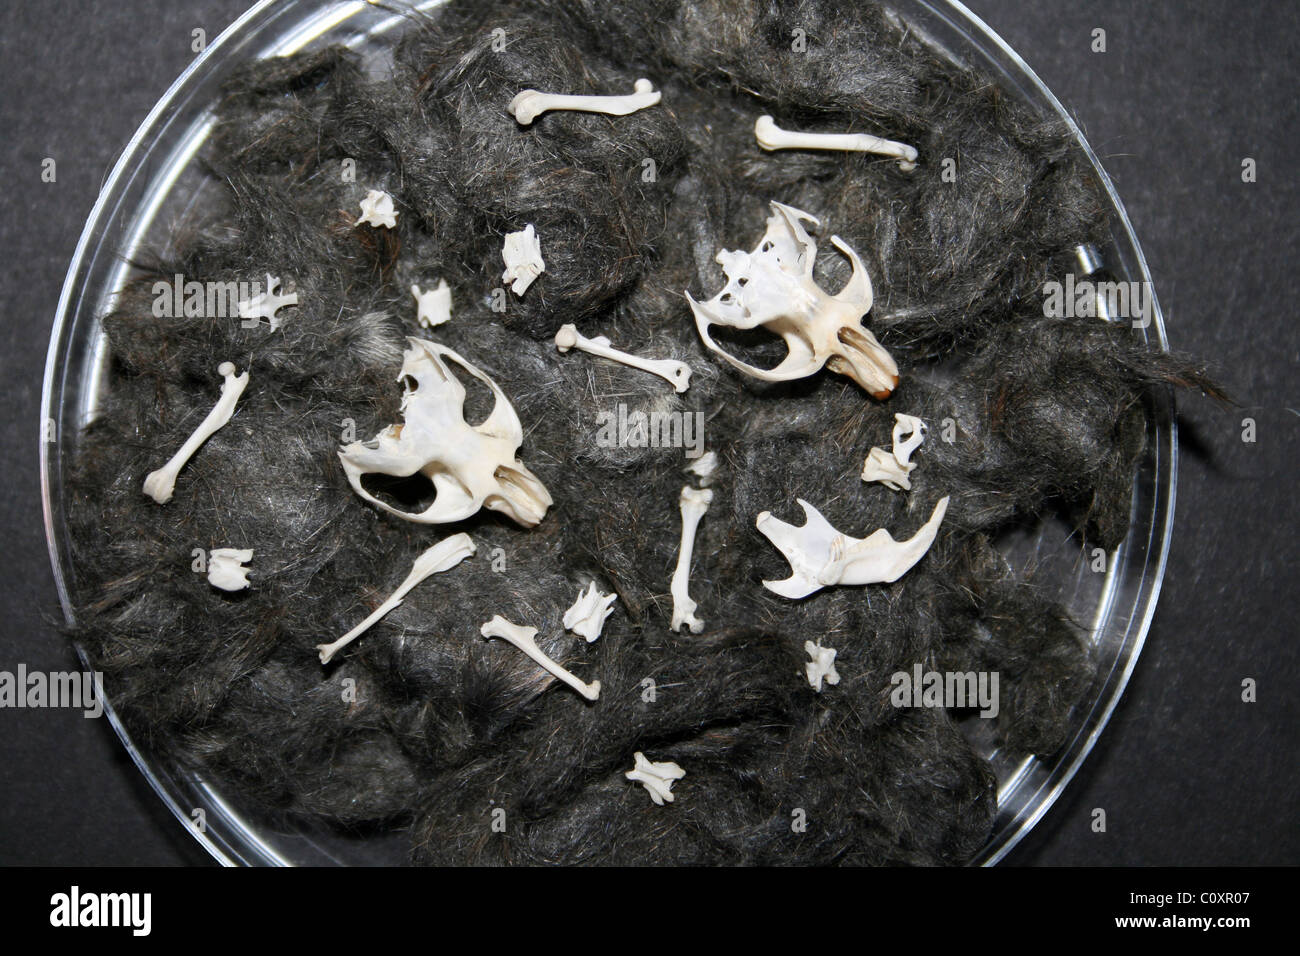 Field (a.k.a Short-tailed) Vole Microtus agrestis Skulls And Bones Removed From A Barn Owl Pellet Stock Photo